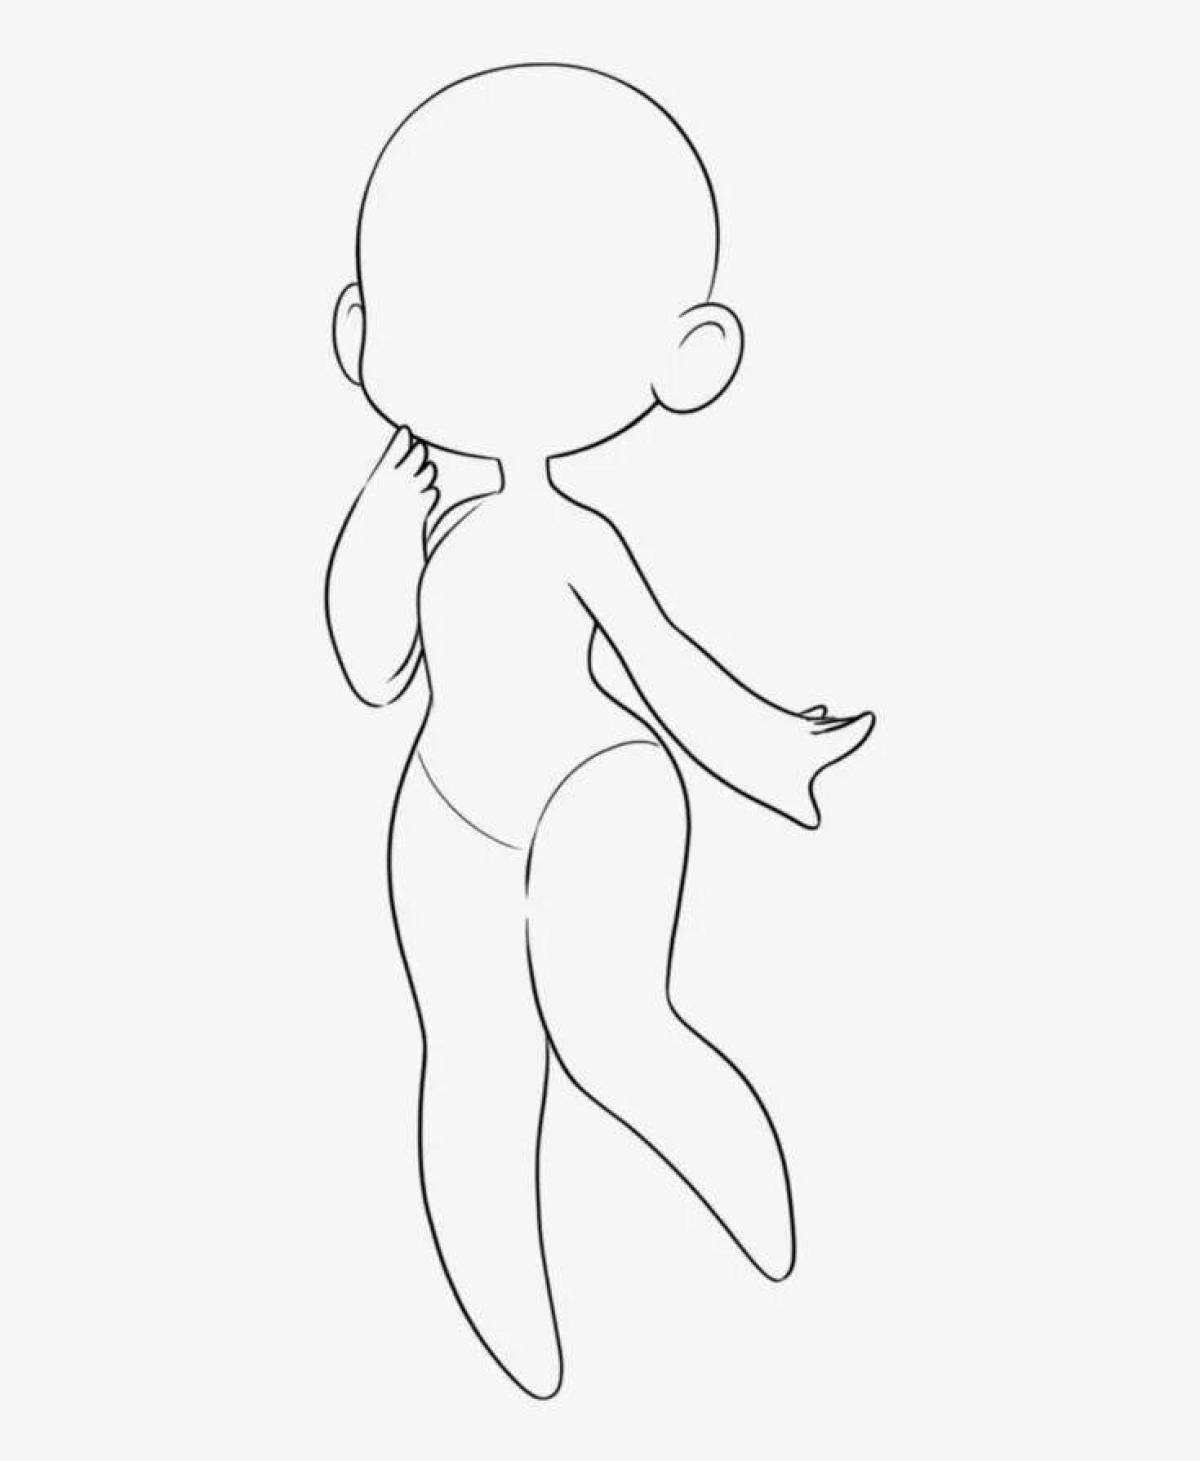 Fun poses for coloring